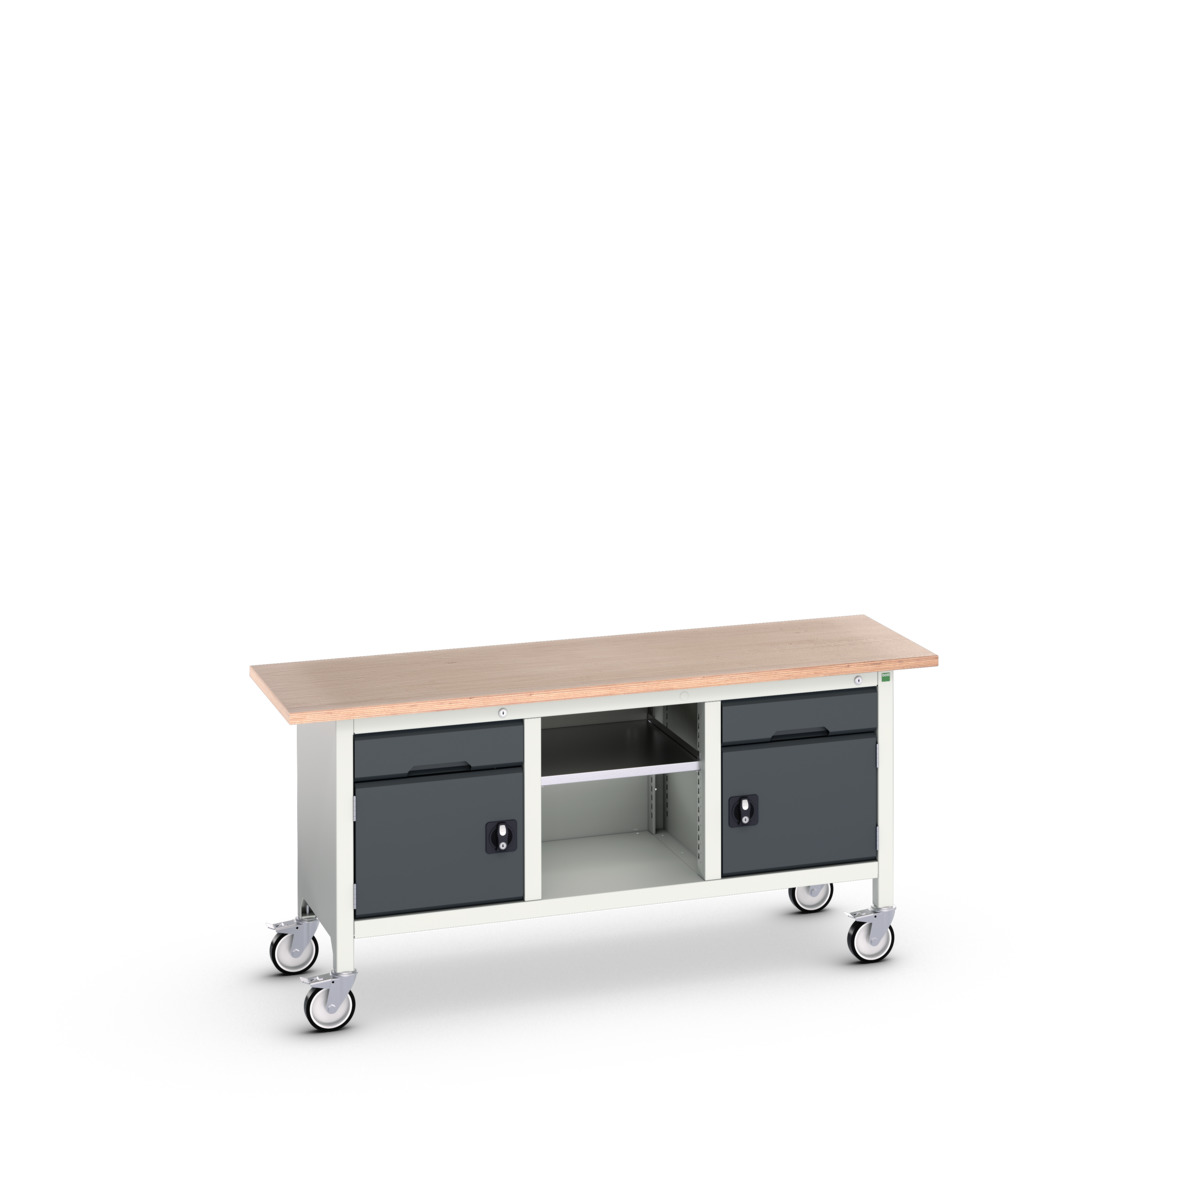 16923221.19 - verso mobile storage bench (mpx)